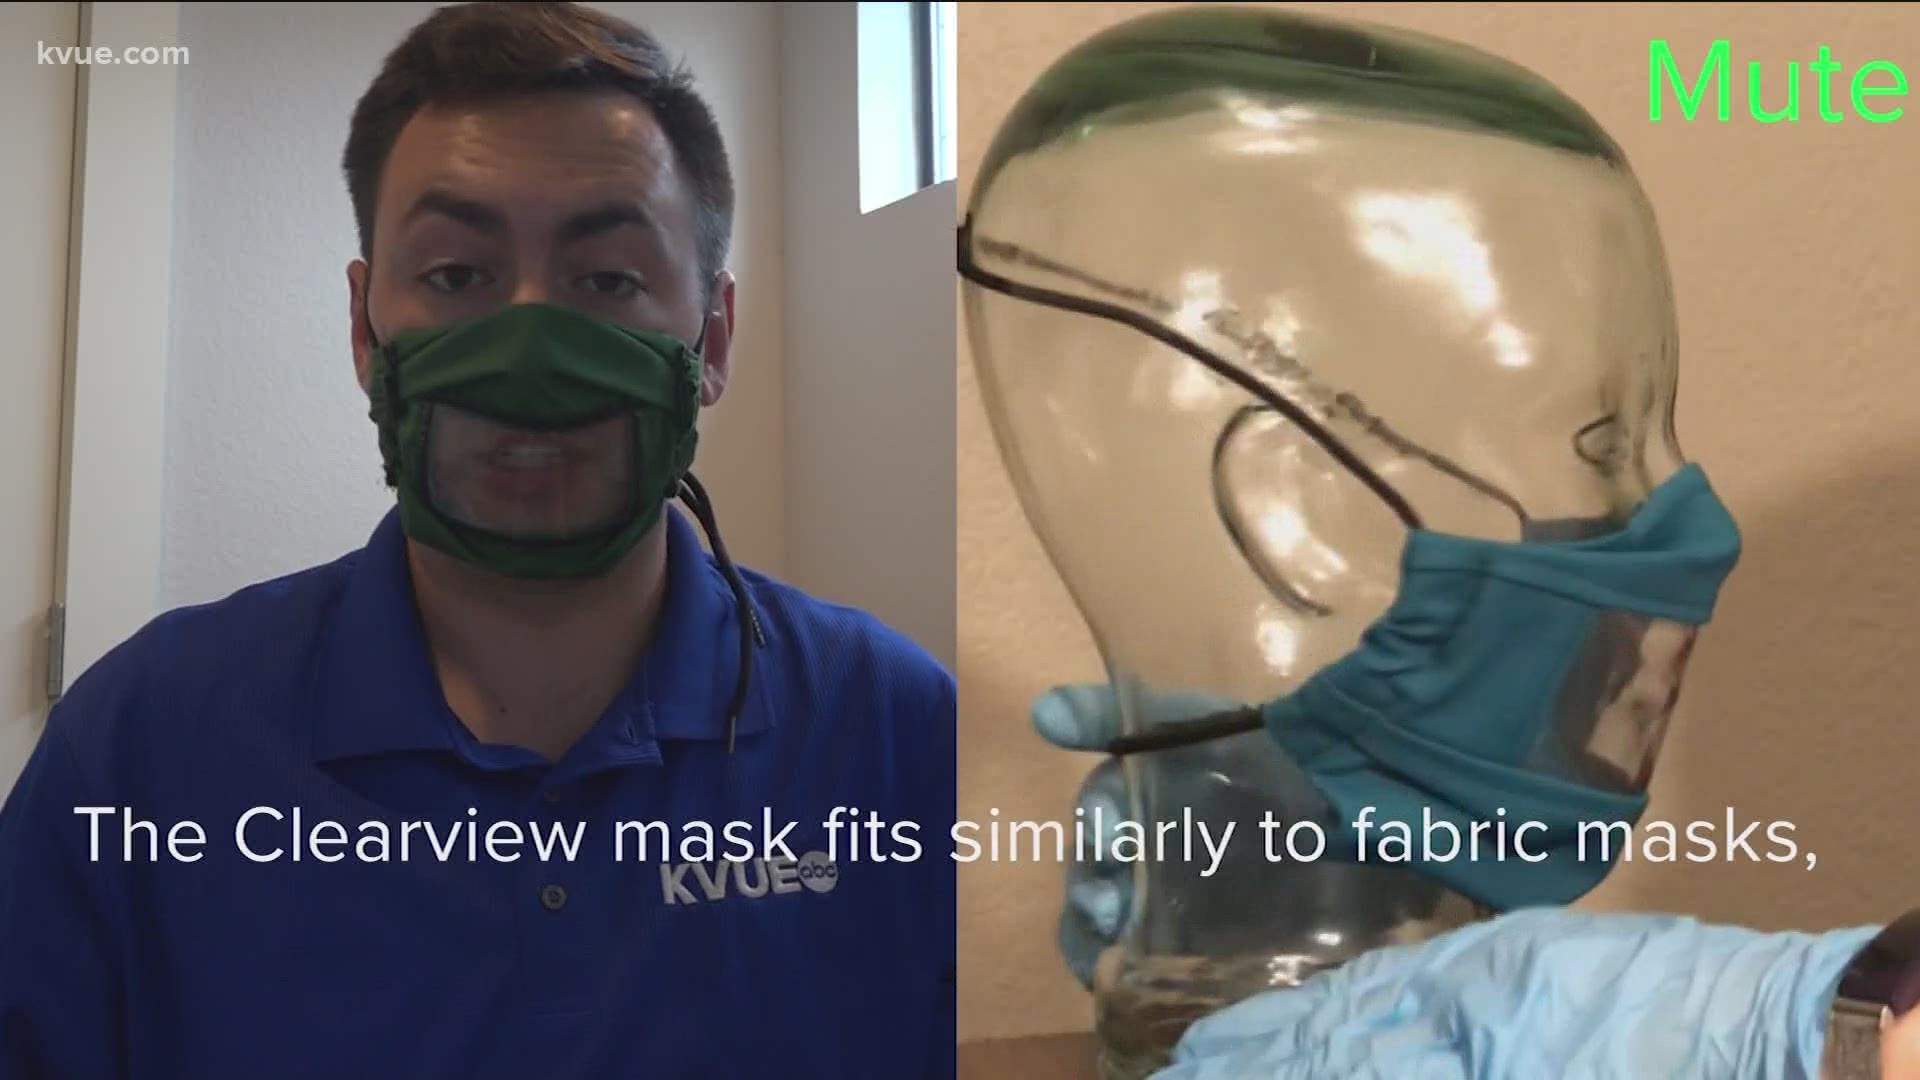 For months, people have taken it upon themselves to make masks. People are making more see-through masks to help those who need to see what's being said.